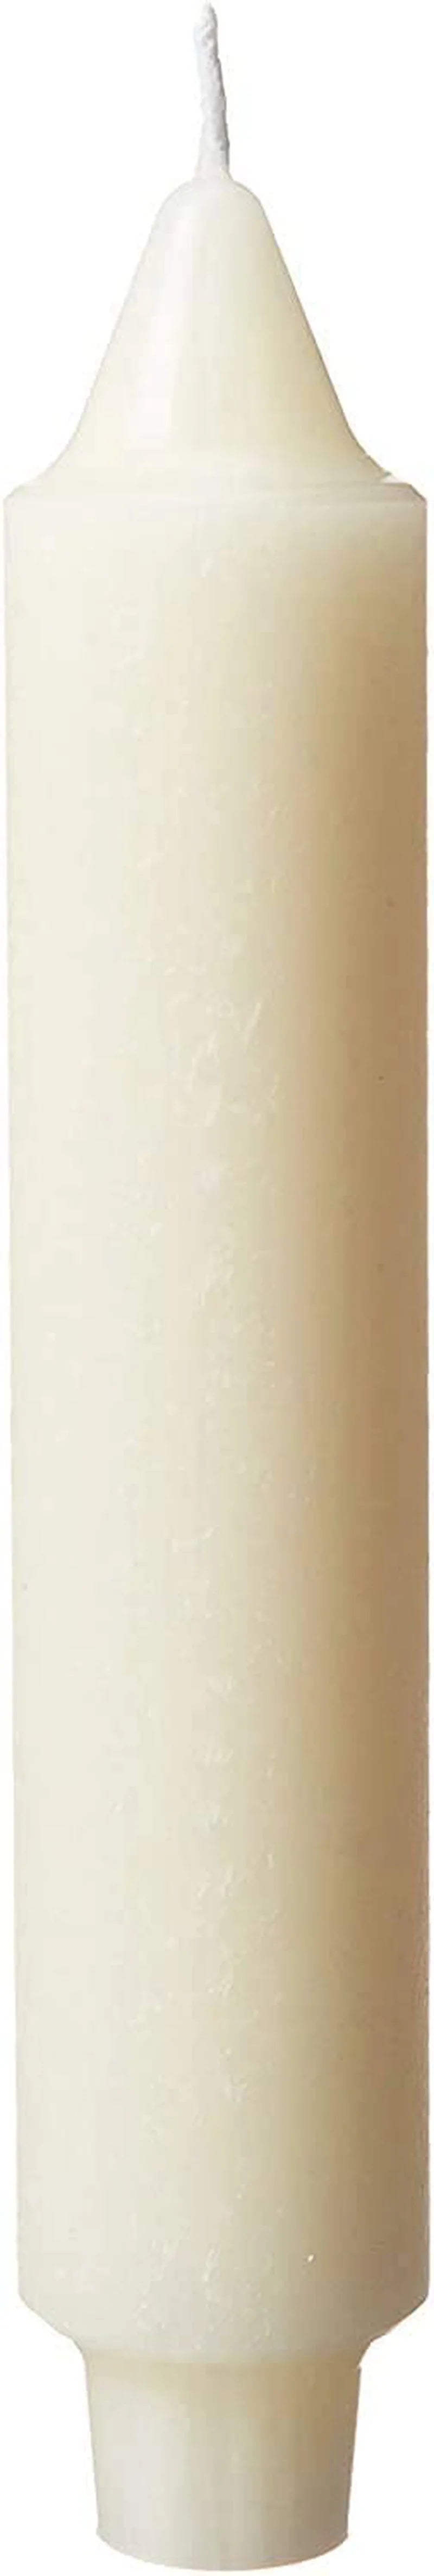 Root Unscented Timberline Collenettes Dinner Candles, 7-Inch Tall, Box of 4, Ivory